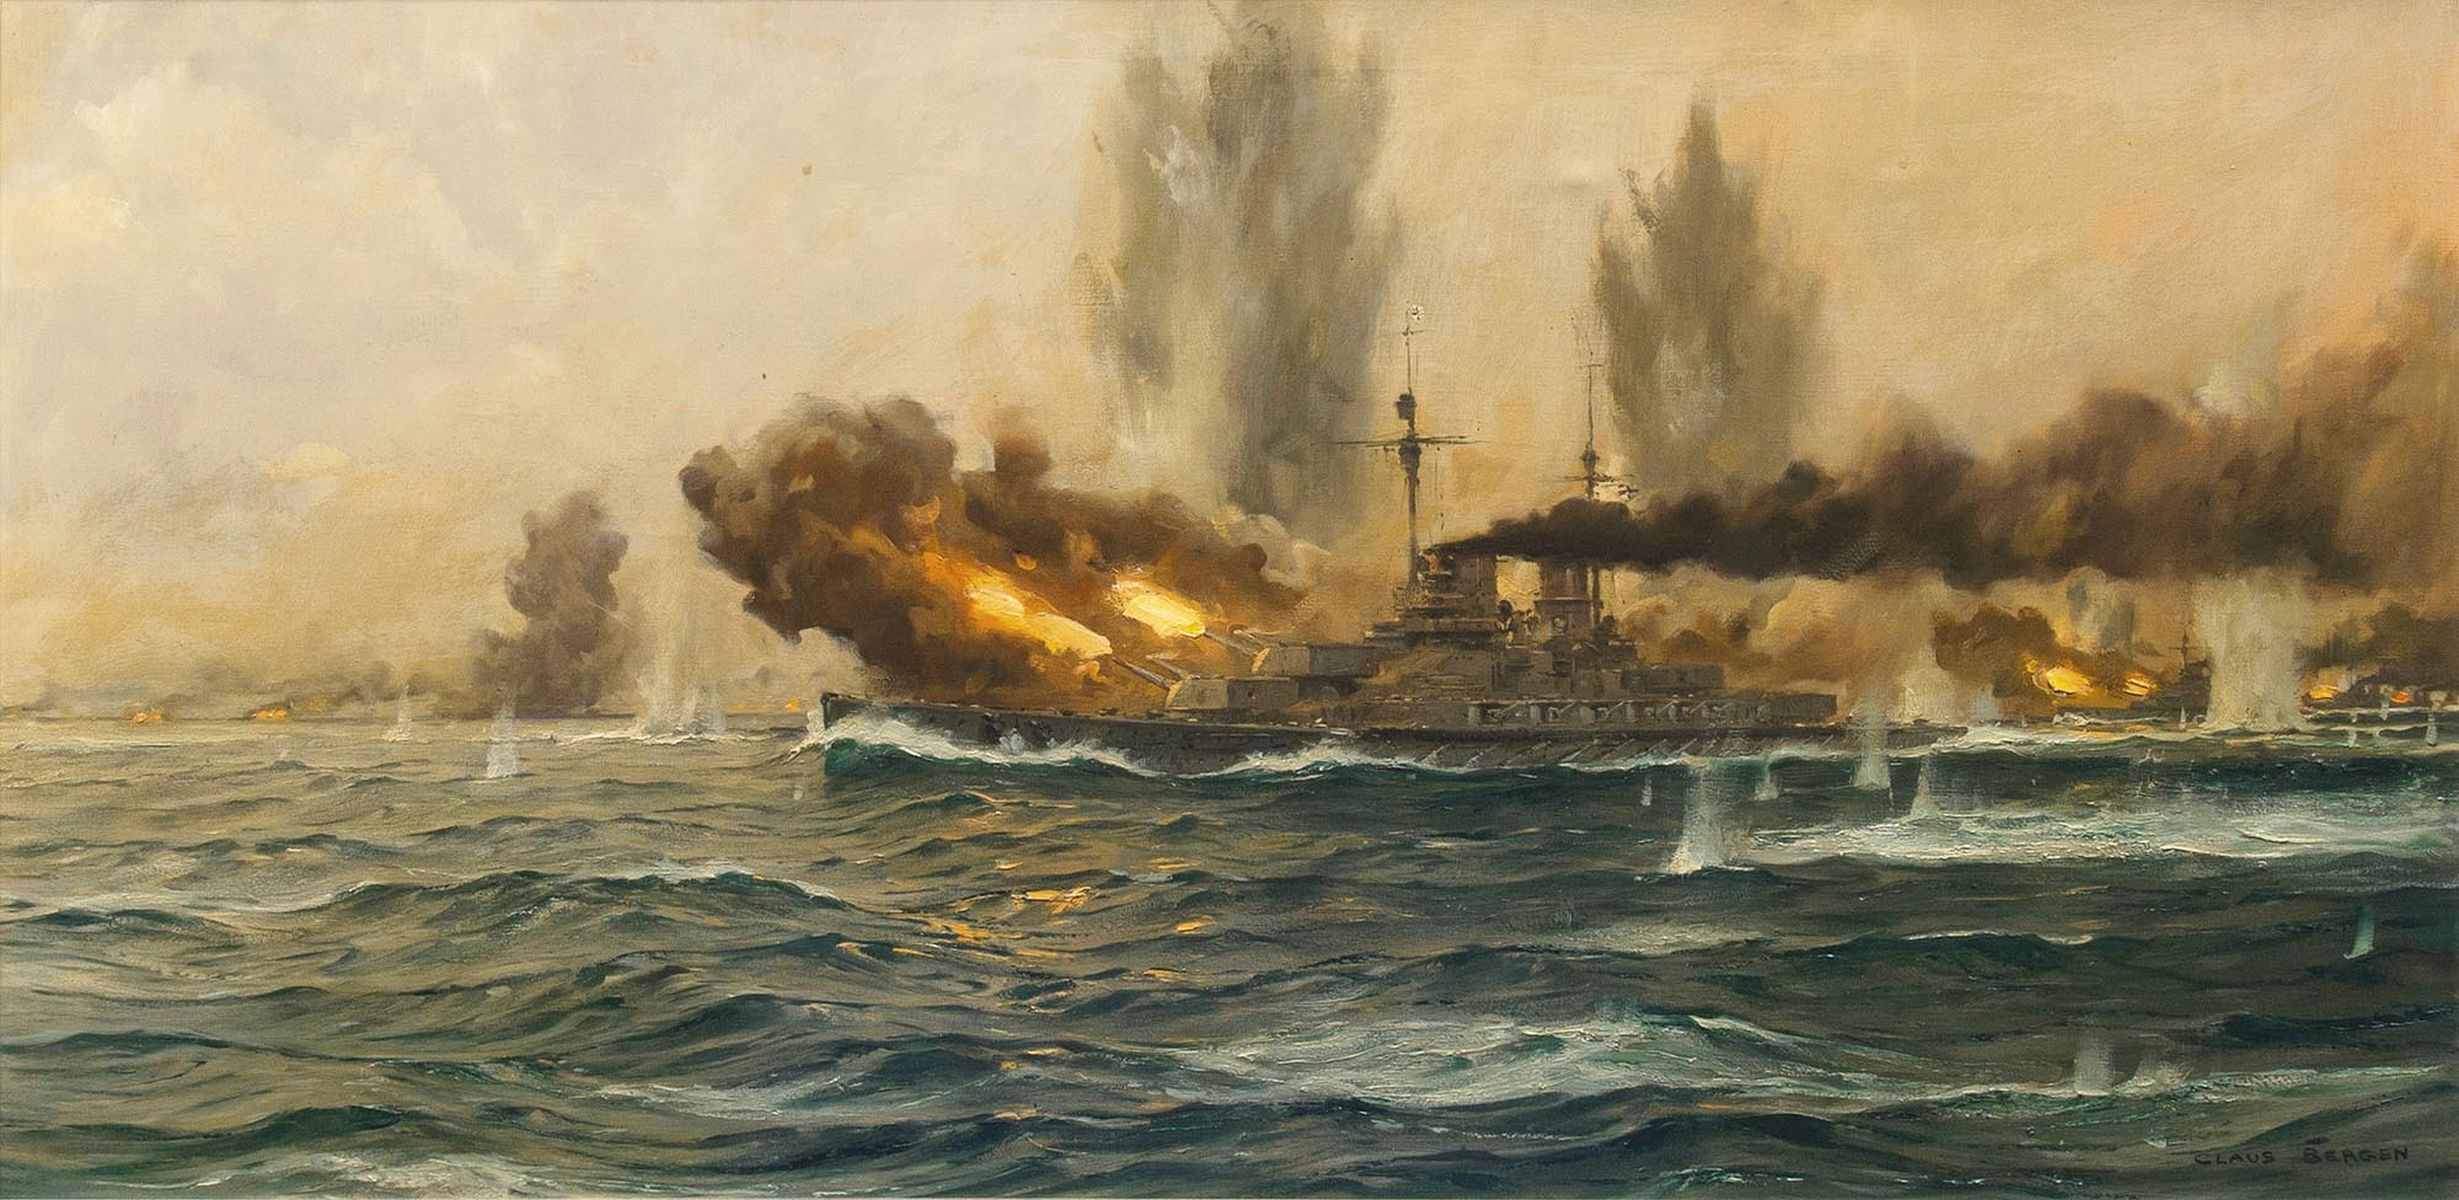 The SMS Lützow in the Battle of Jutland